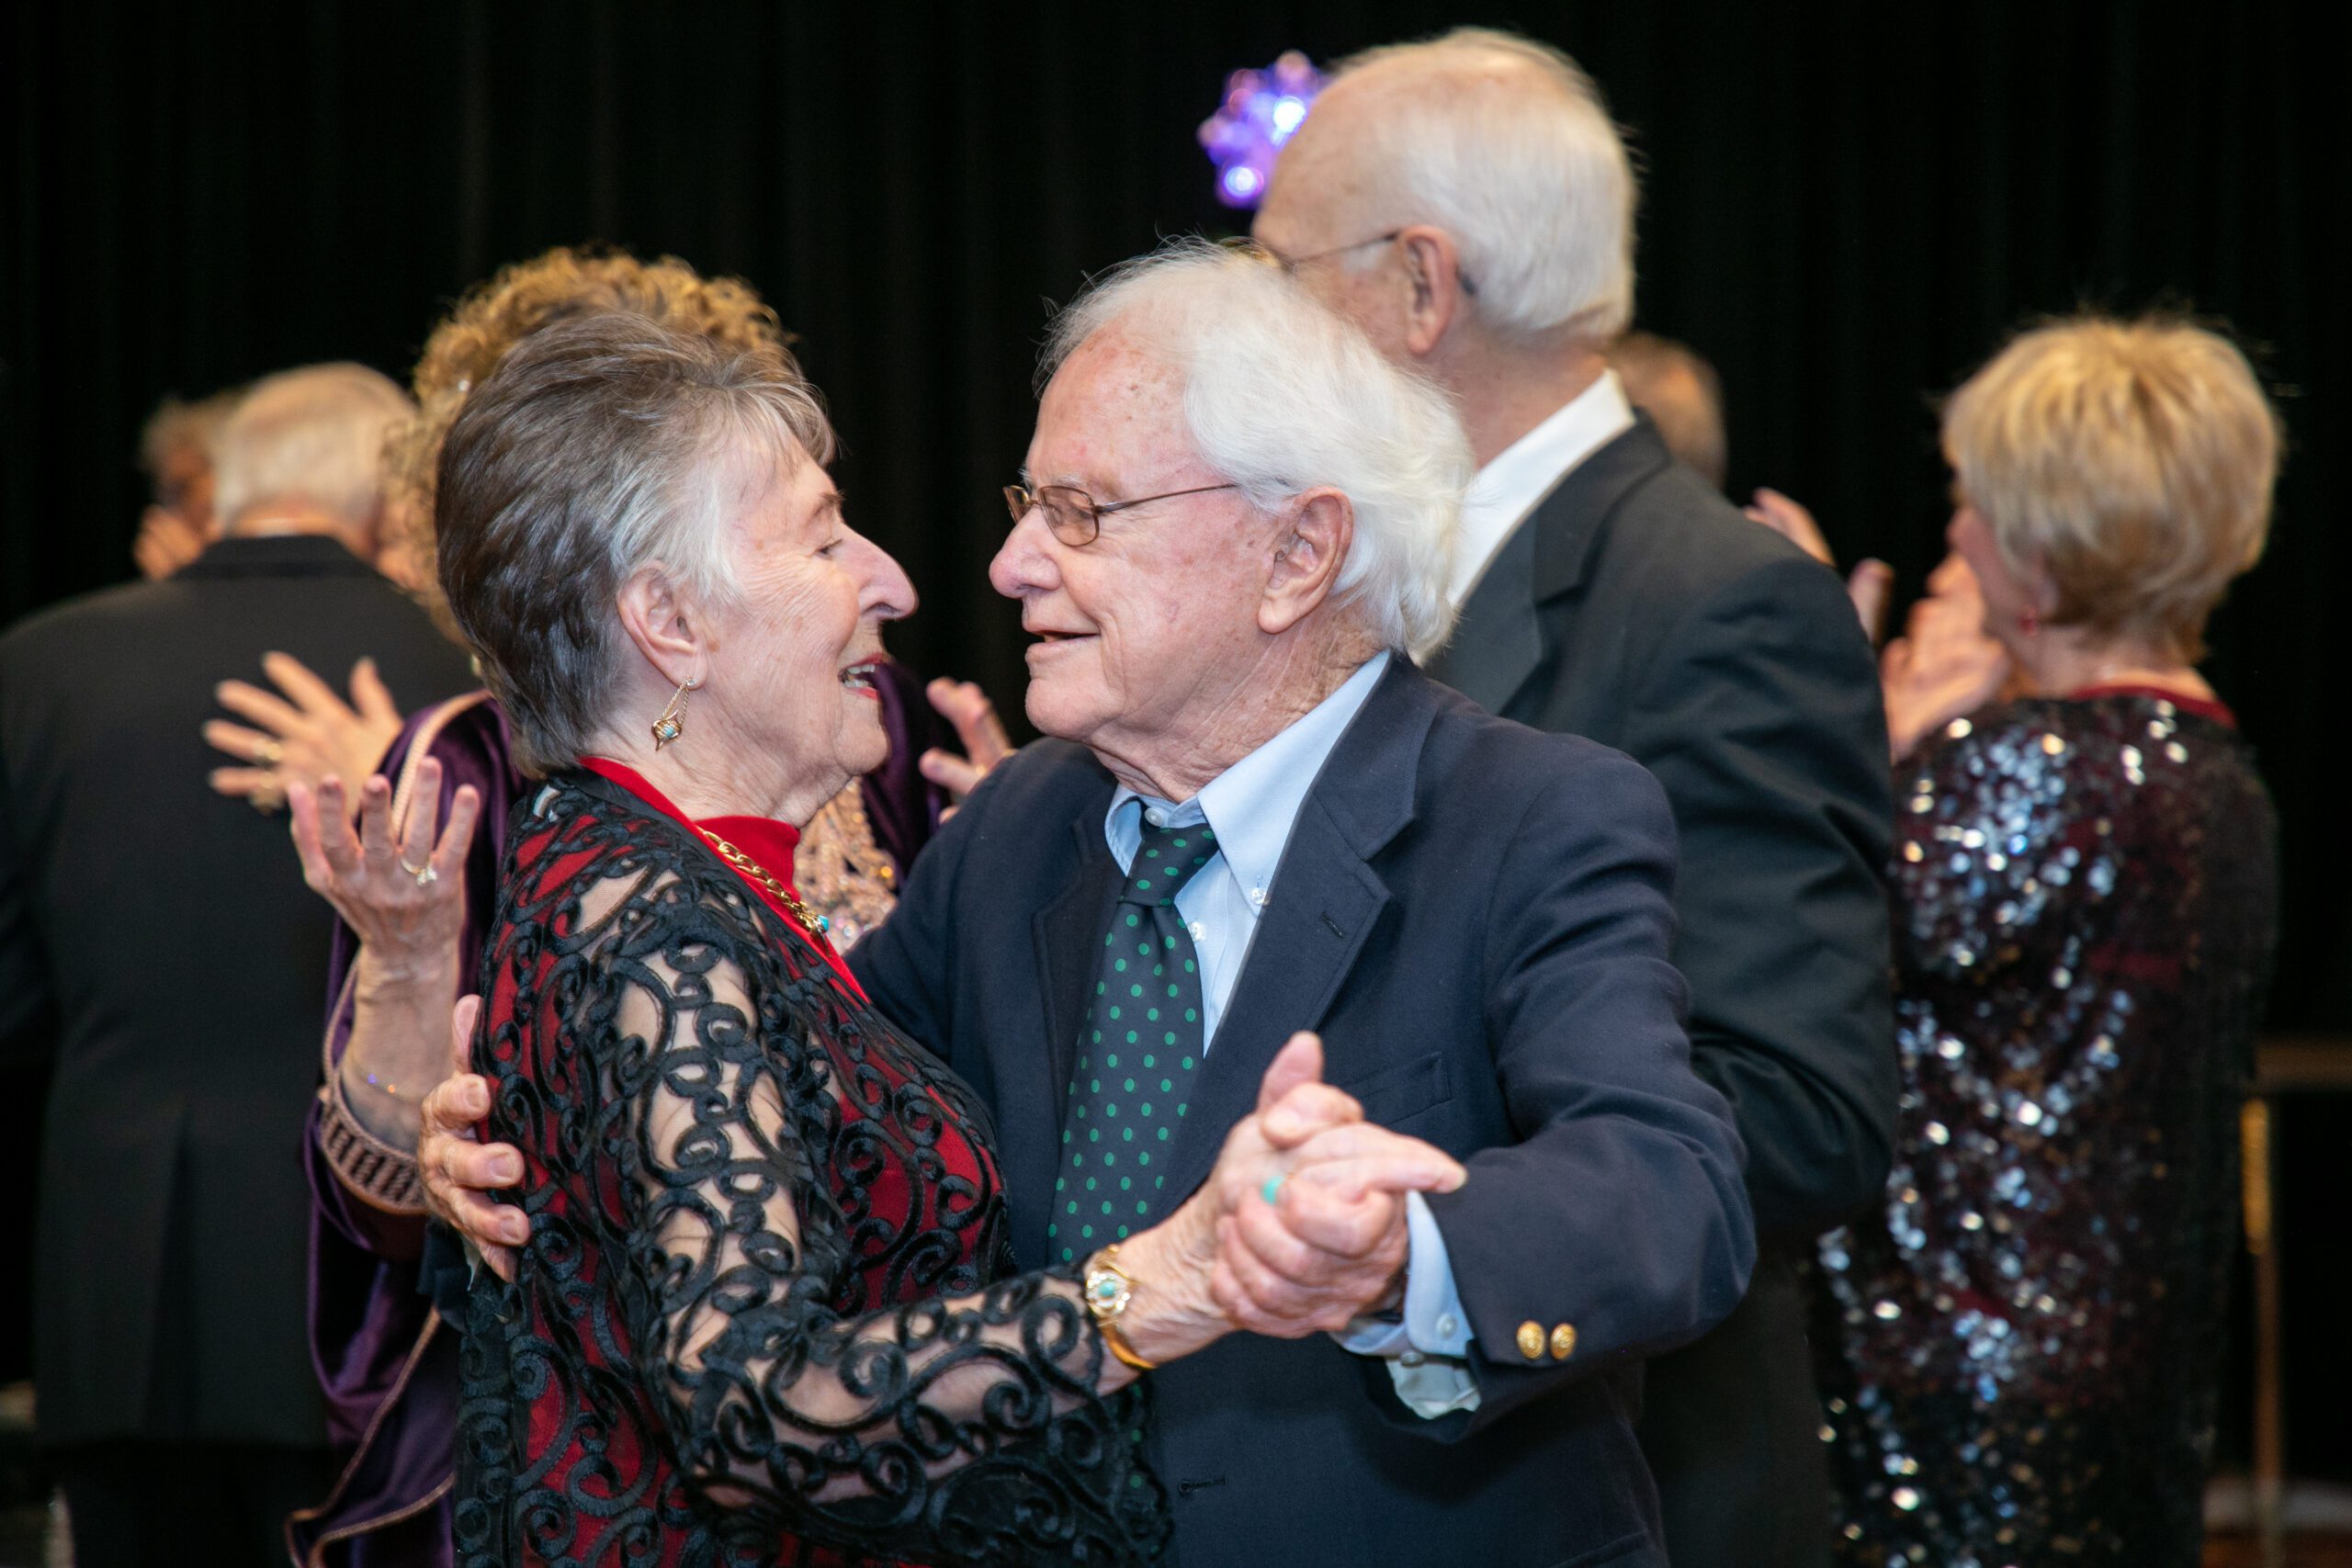 our residents dancing at our Gala